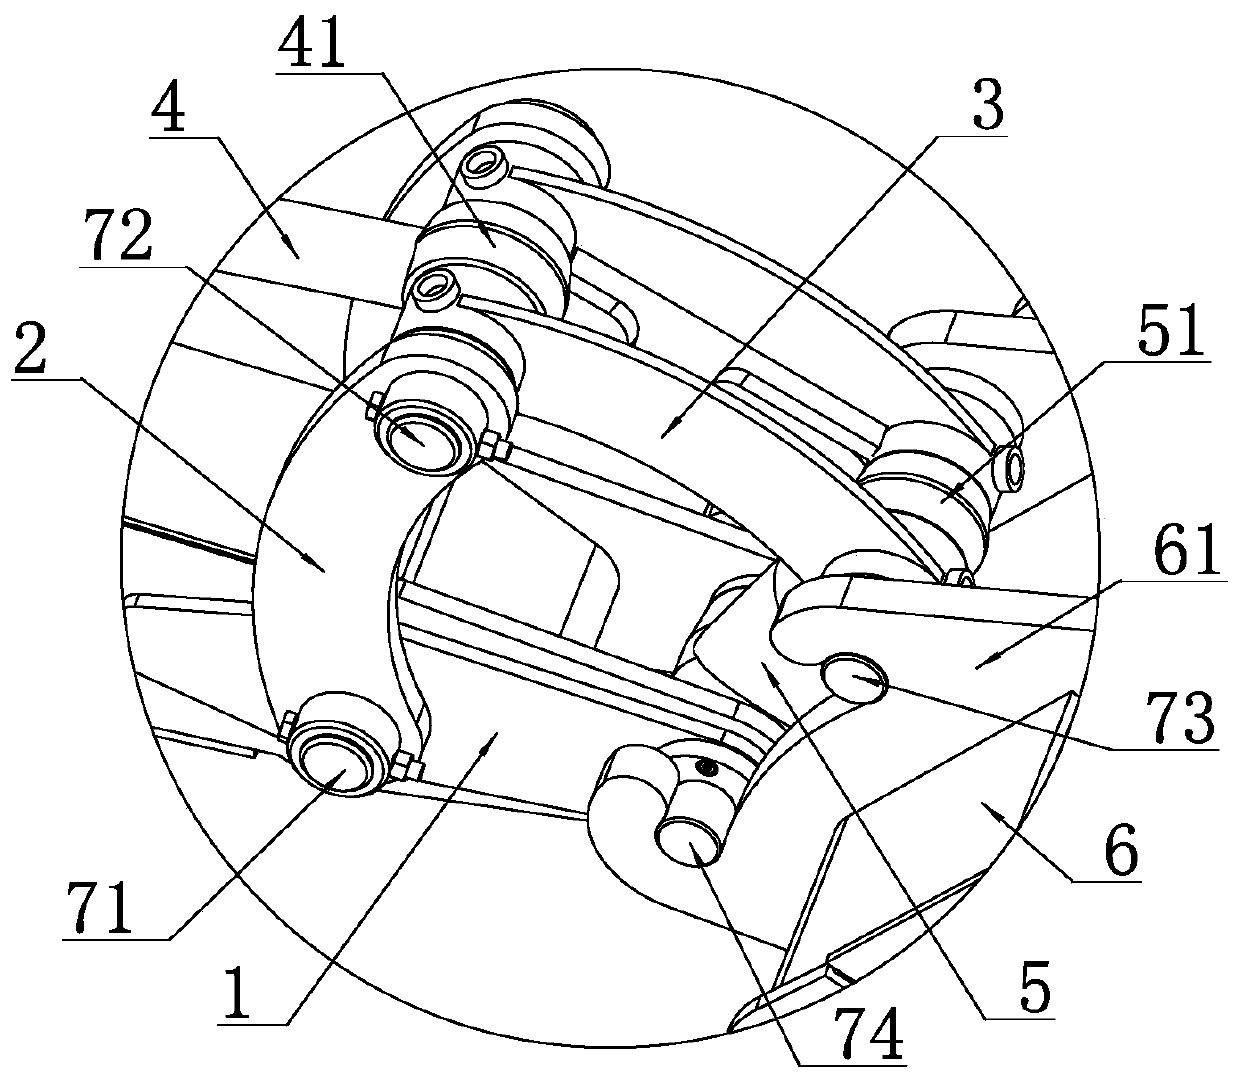 Connection structure applied between bucket rod and executive part of excavator